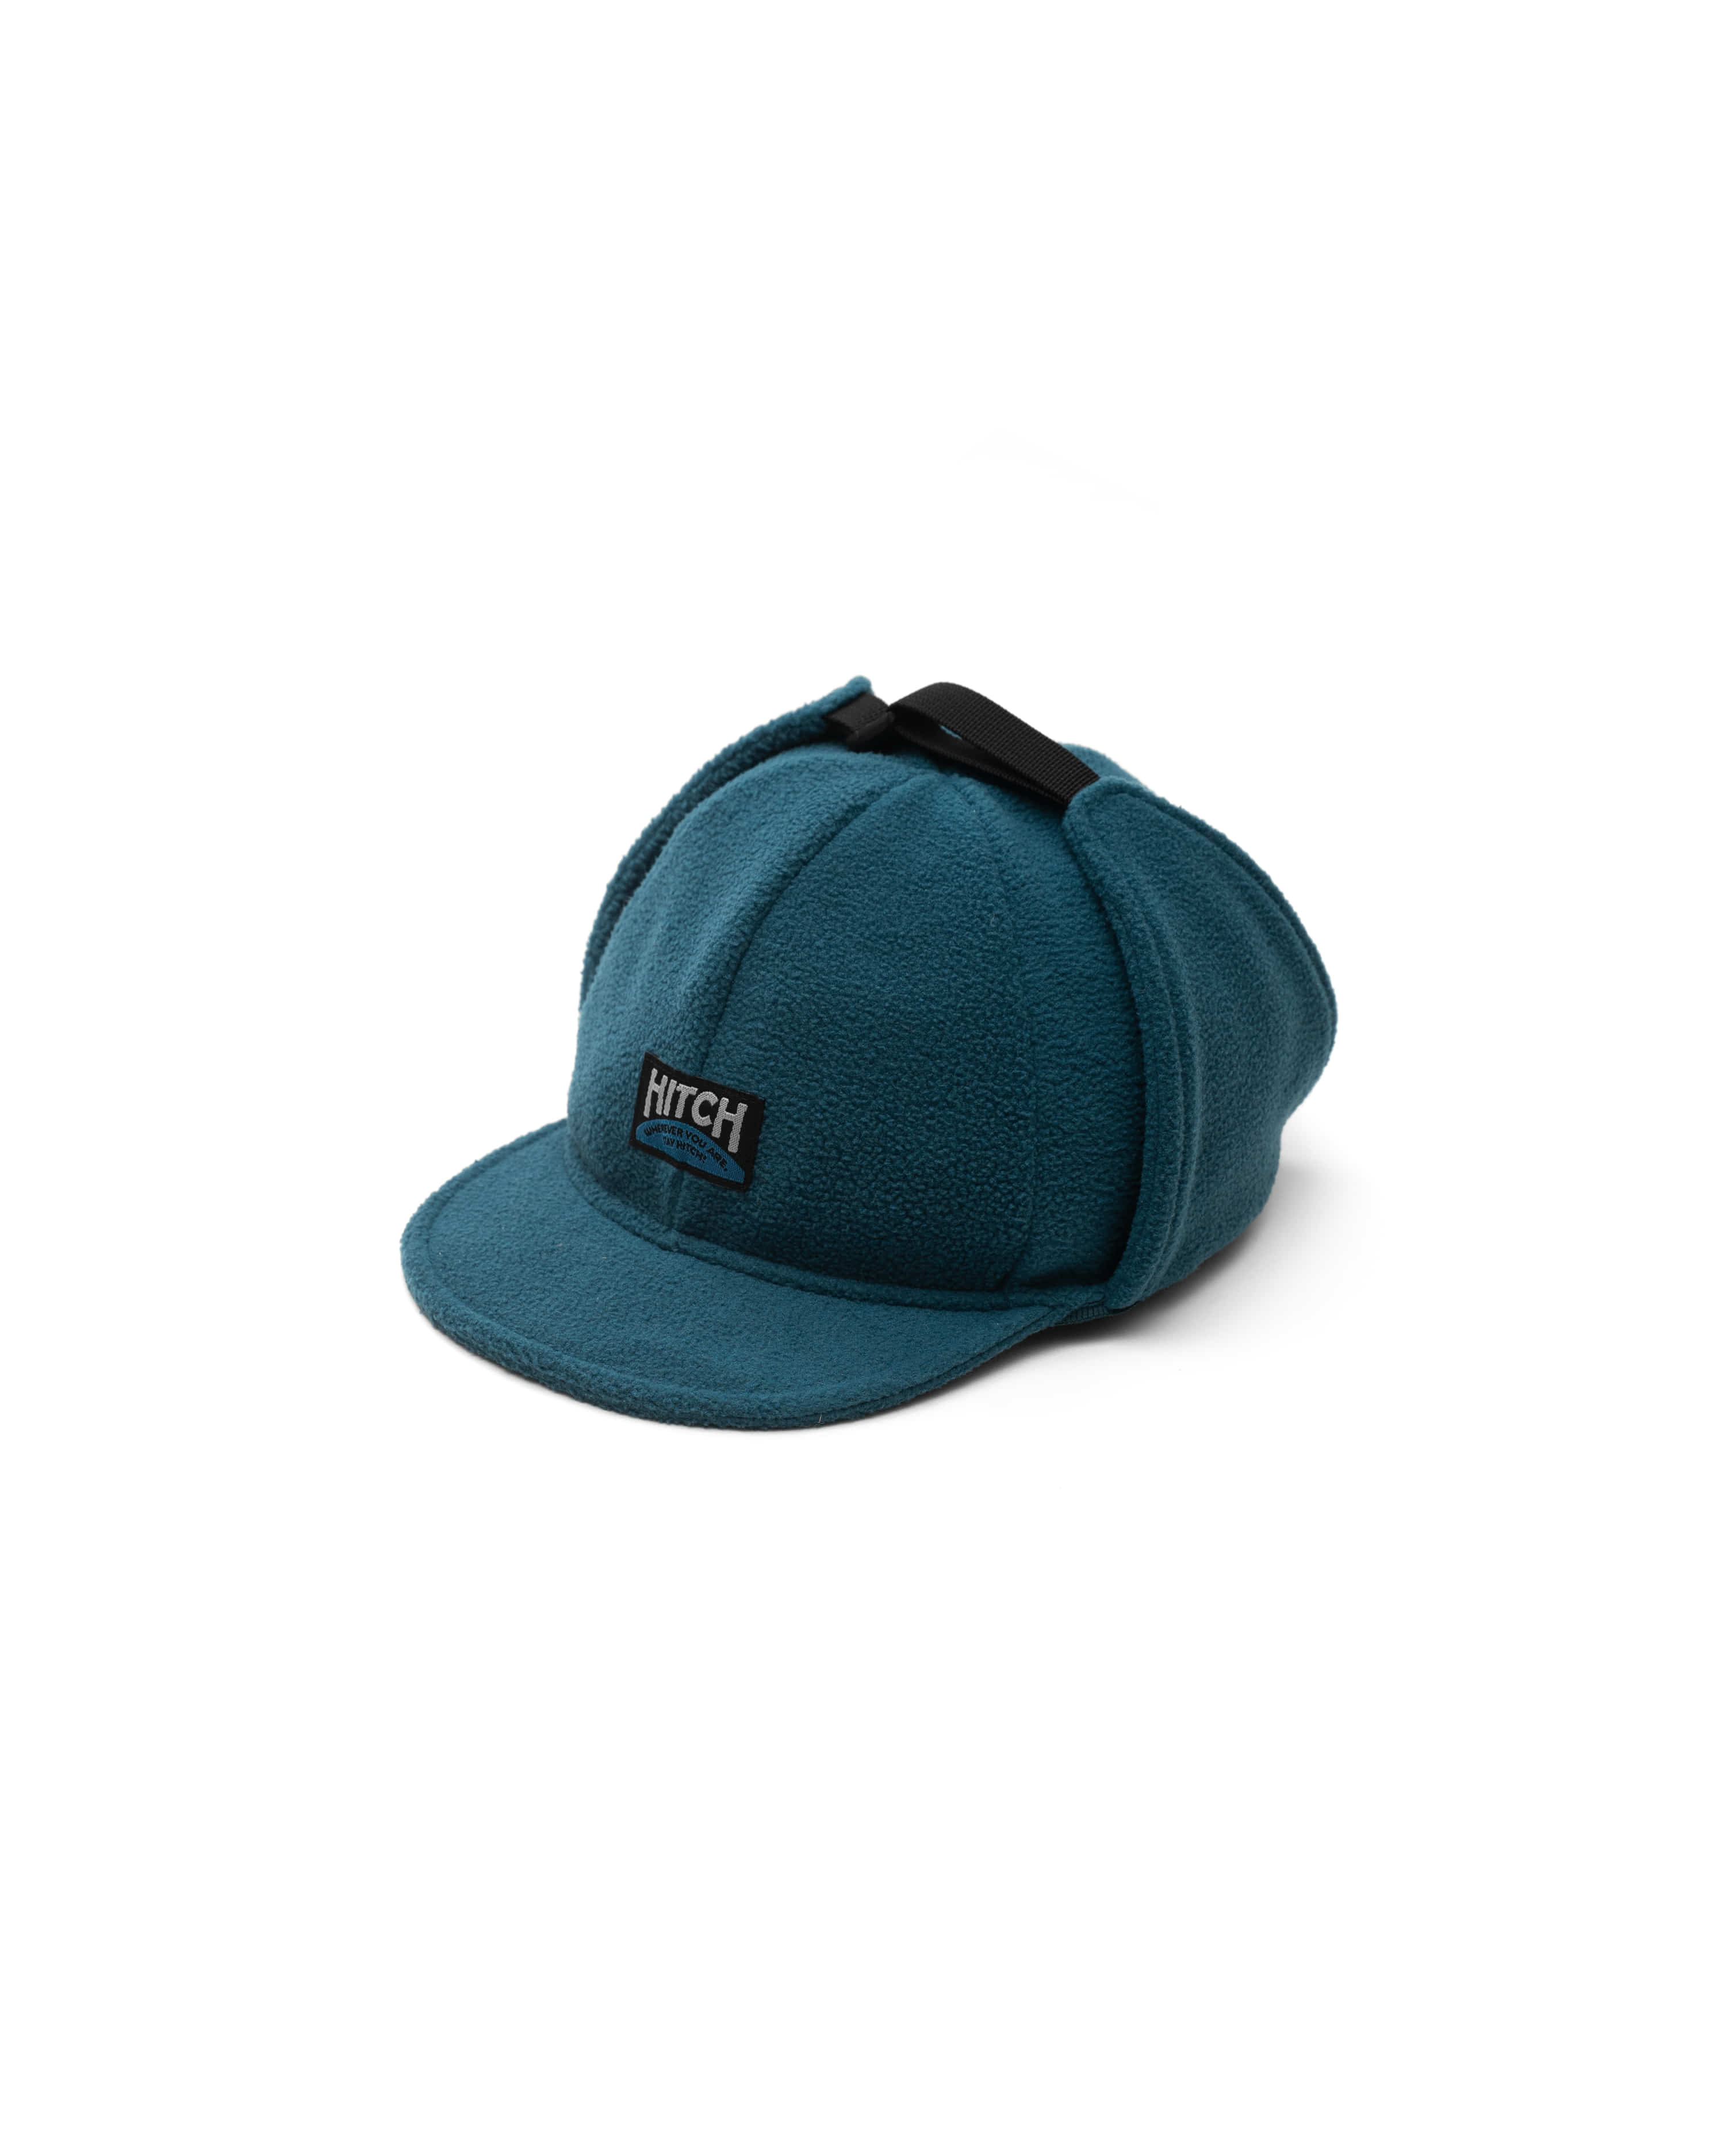 [out of stock] Basecamp - Teal (Fleece)